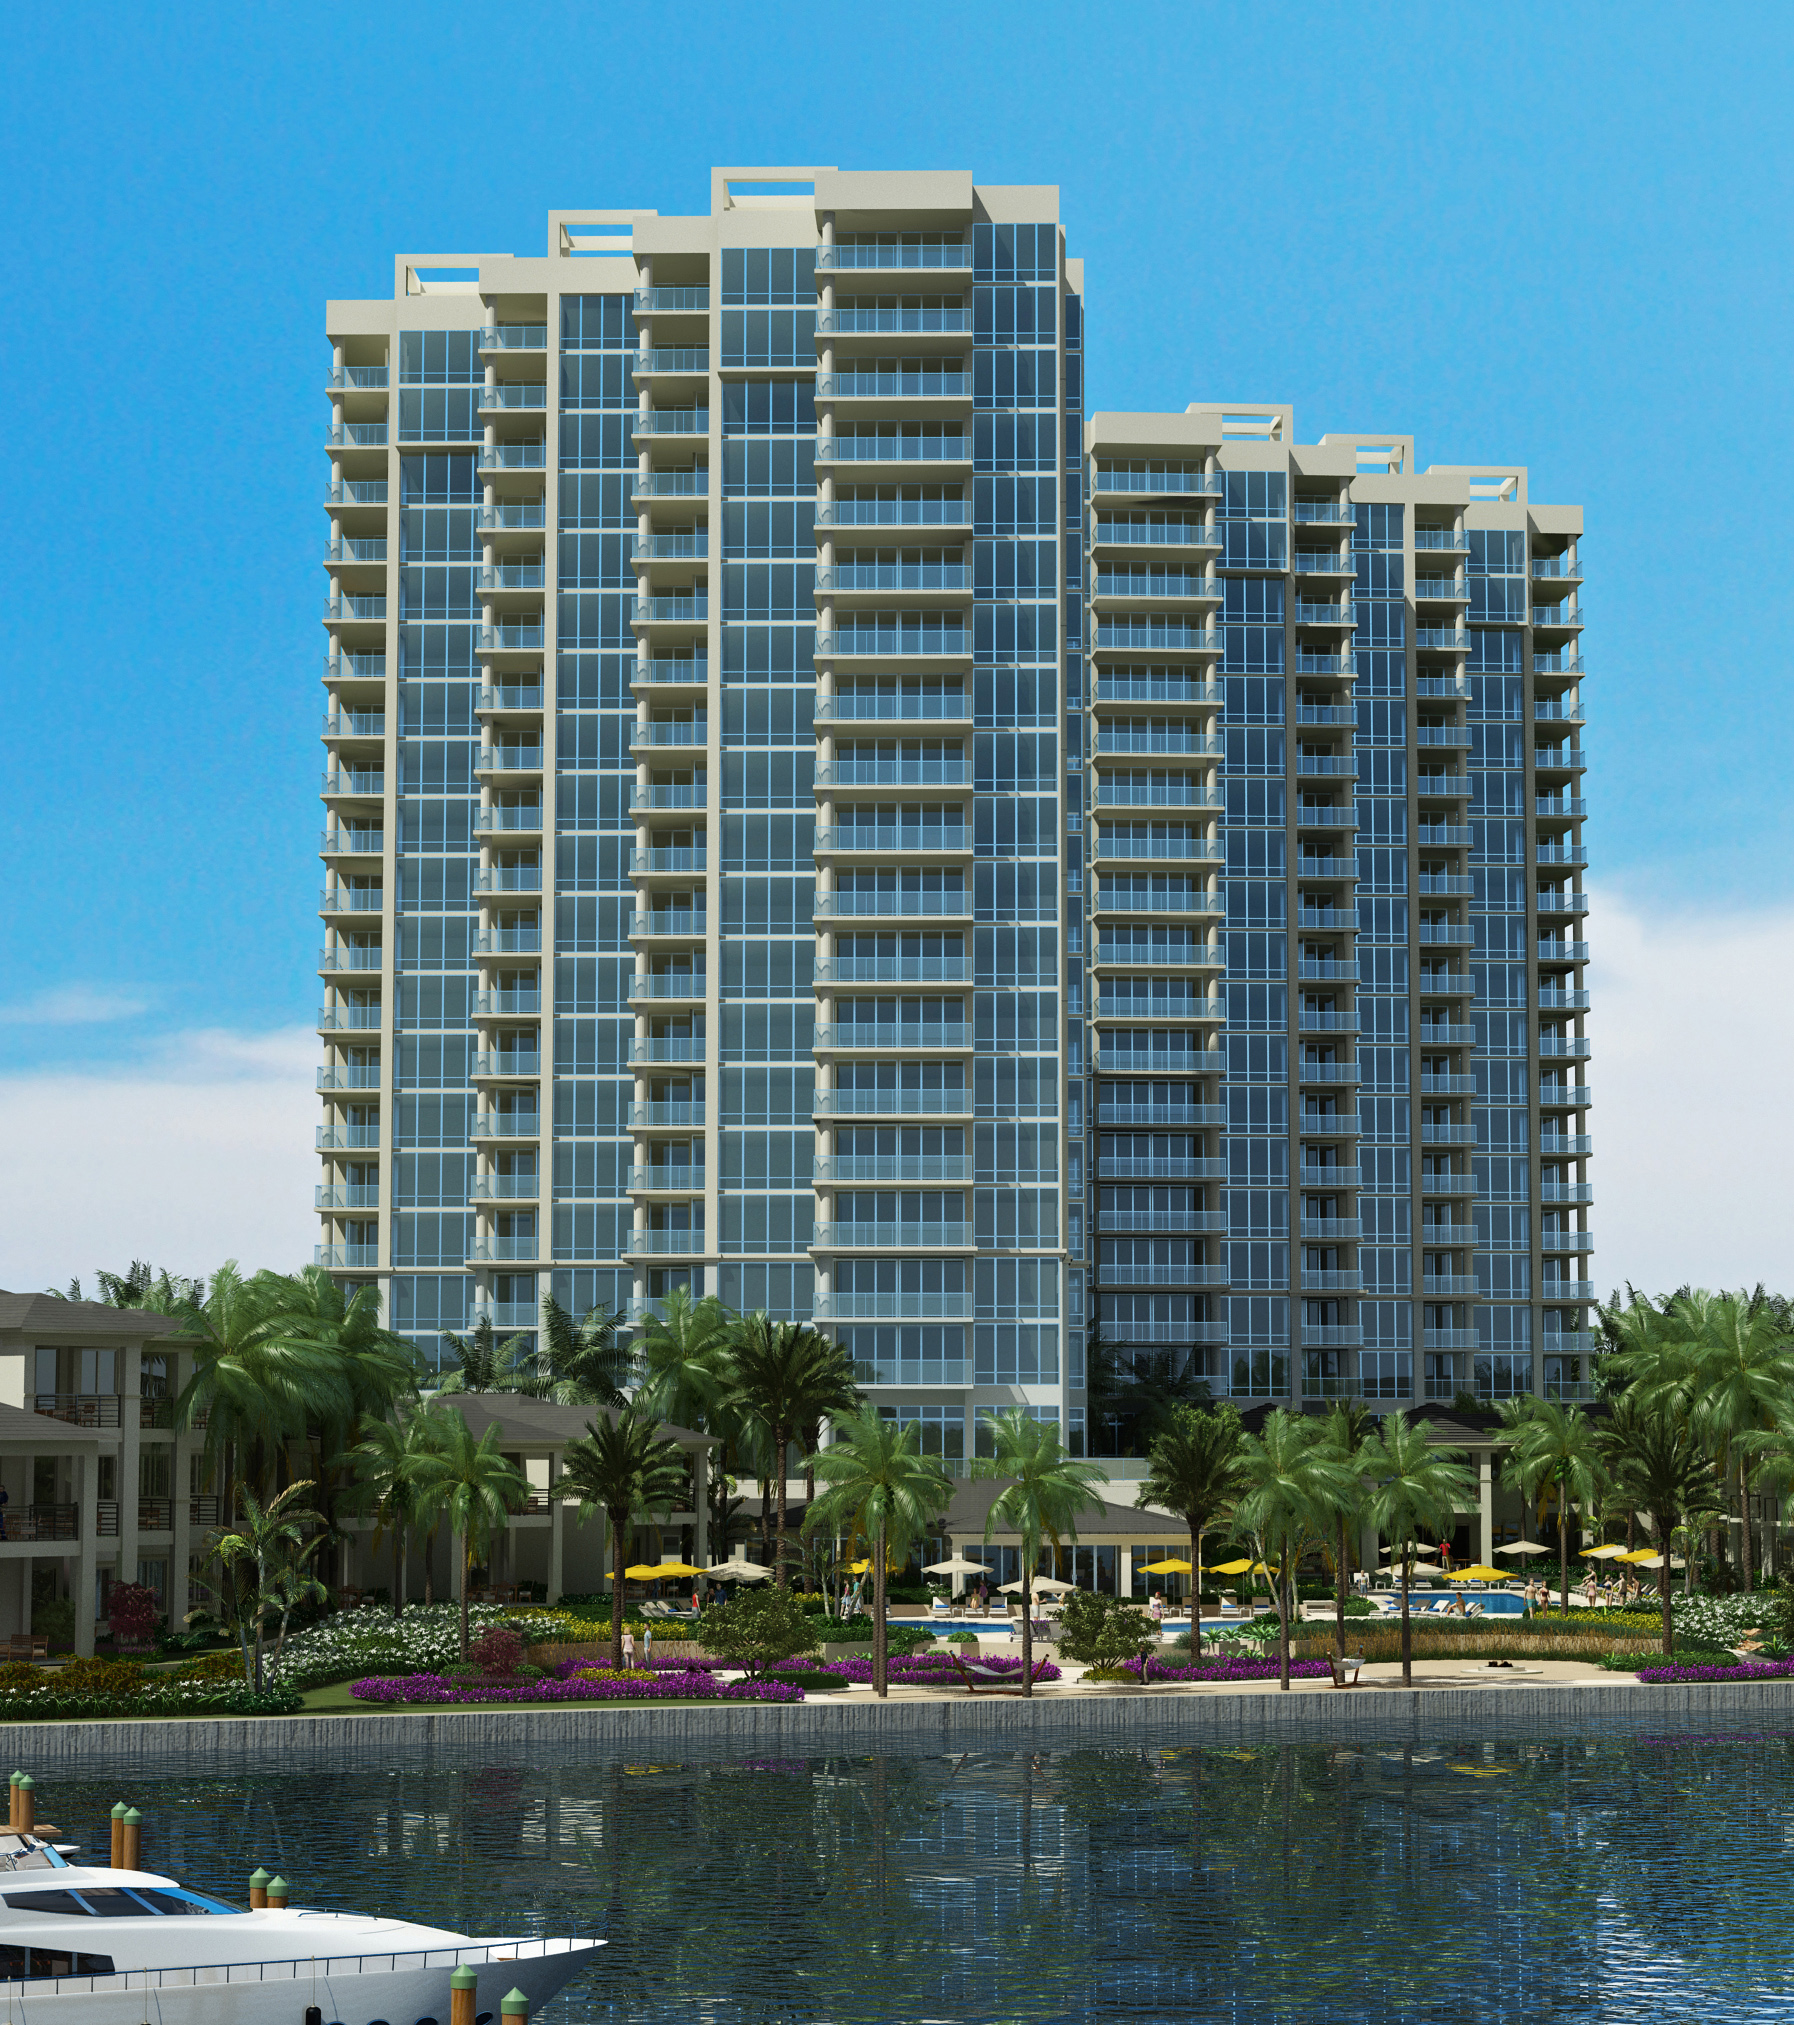 Water Club North Palm Beach will feature twin 22-story luxury condominium towers and 20 waterfront villa residences